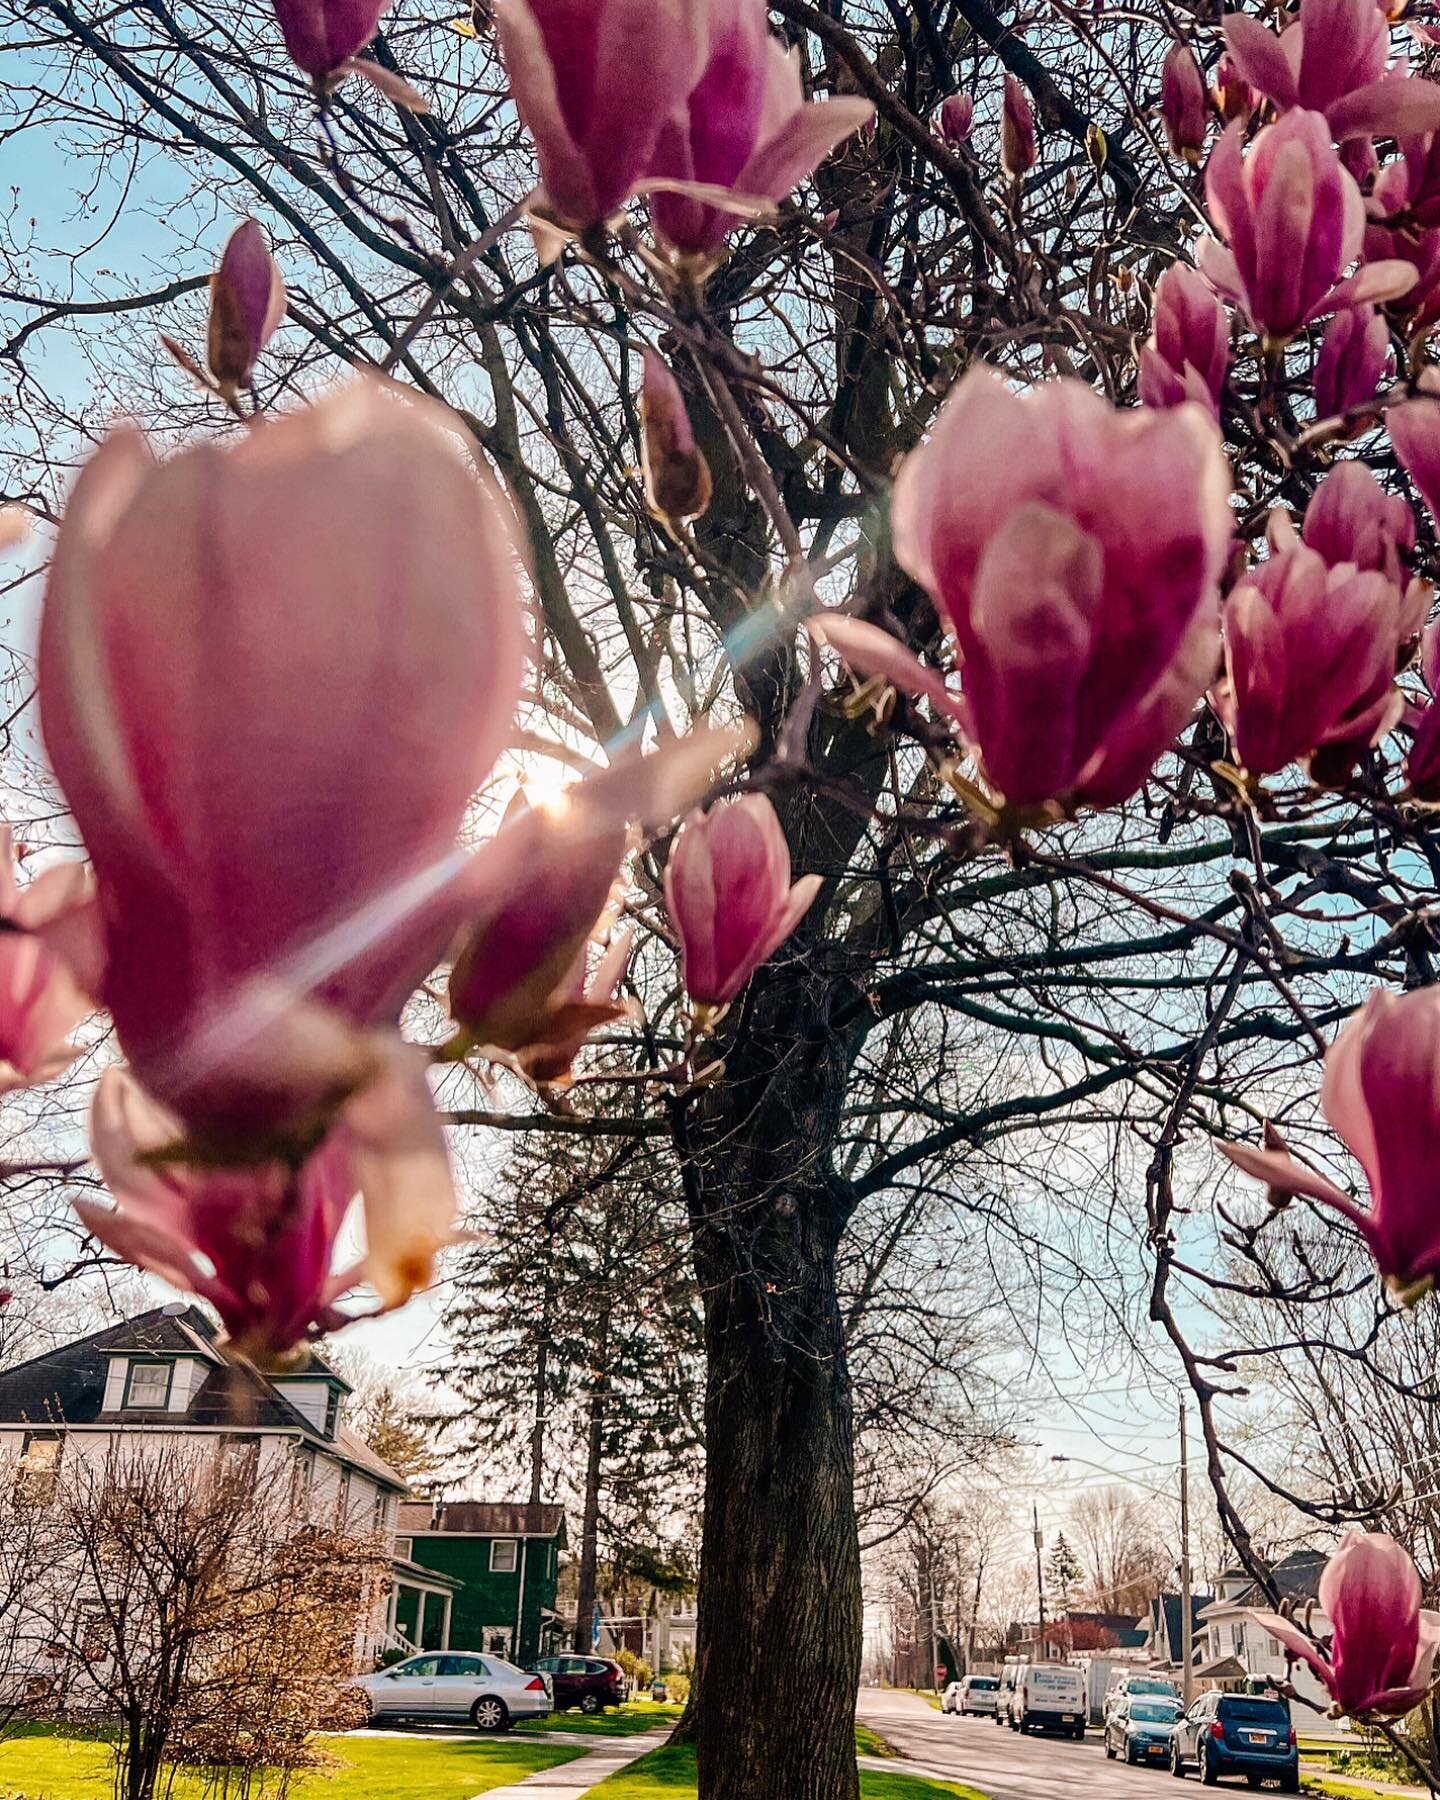 all along, you&rsquo;ve been blooming. 

Happy Friday, babes!

#springhascome #magnoliatree #syr #syracuseny #syracusephotographer #syracusephotography #syracuseheadshotphotographer #brandphotographer #blossoms #bloomingflowers #springflowers🌸